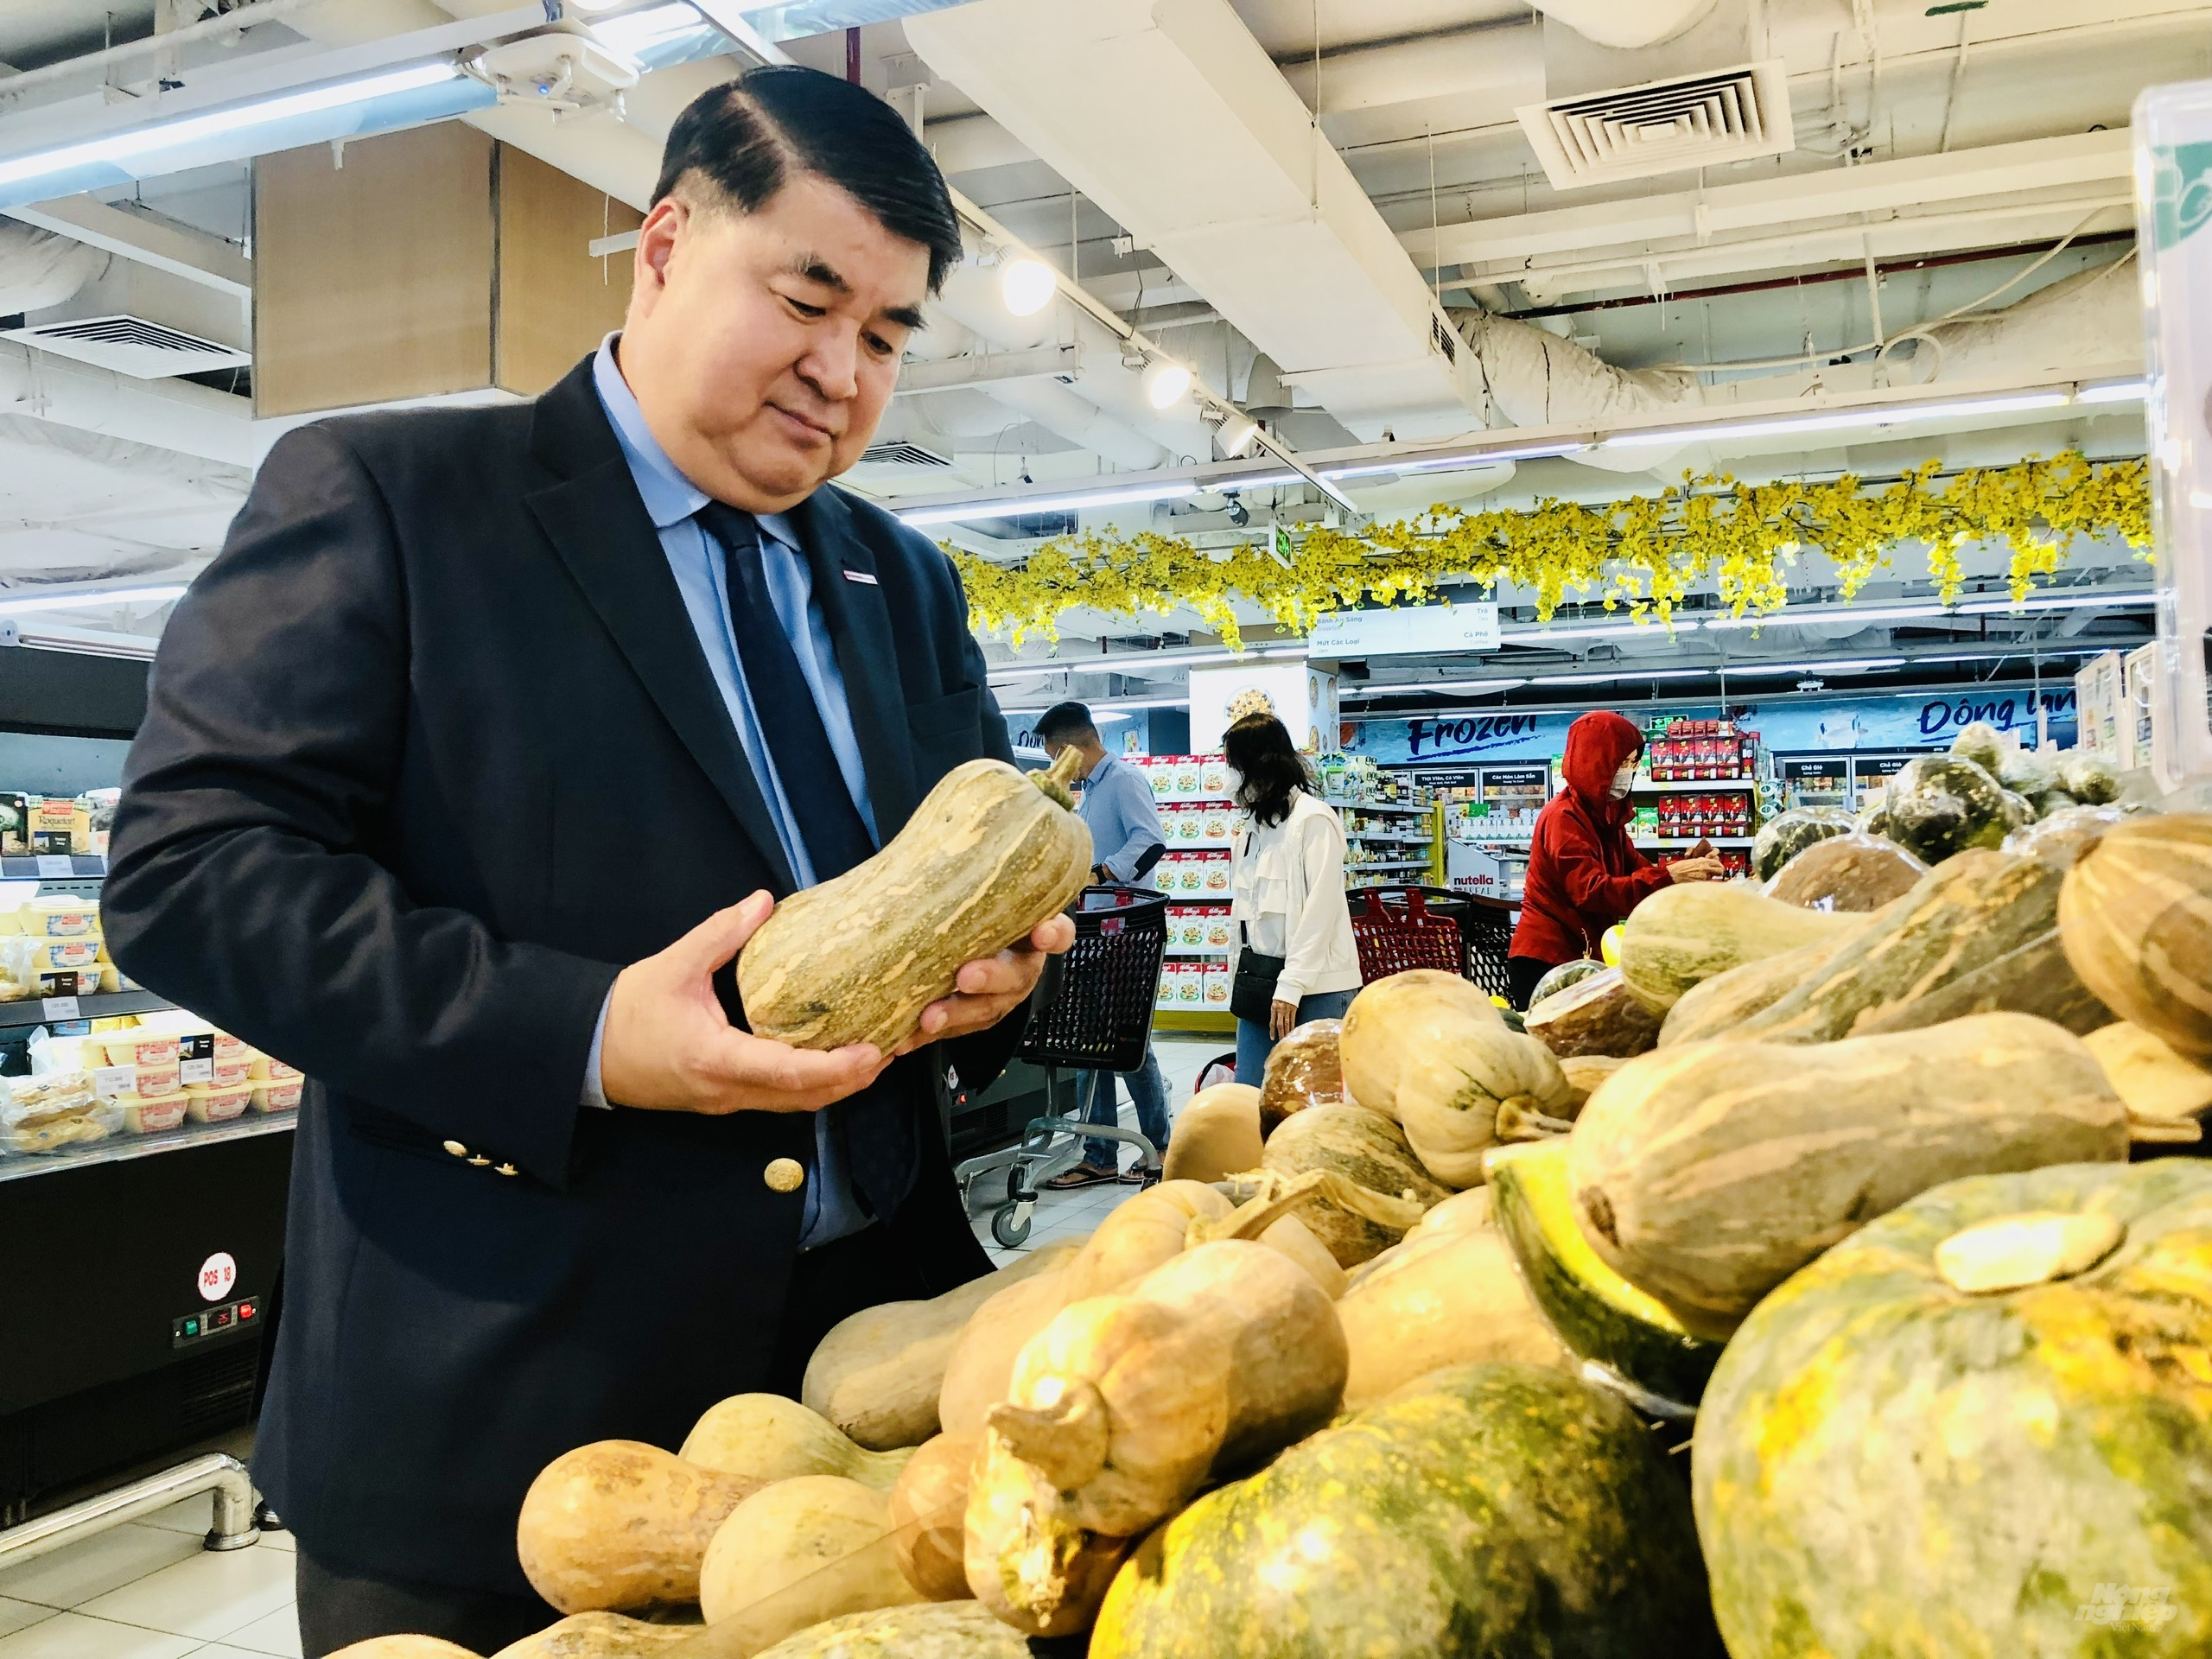 'I will tell the story of Vietnamese fruits and agricultural products to the world,' said Mr. Paul Le. Photo: Minh Sang.